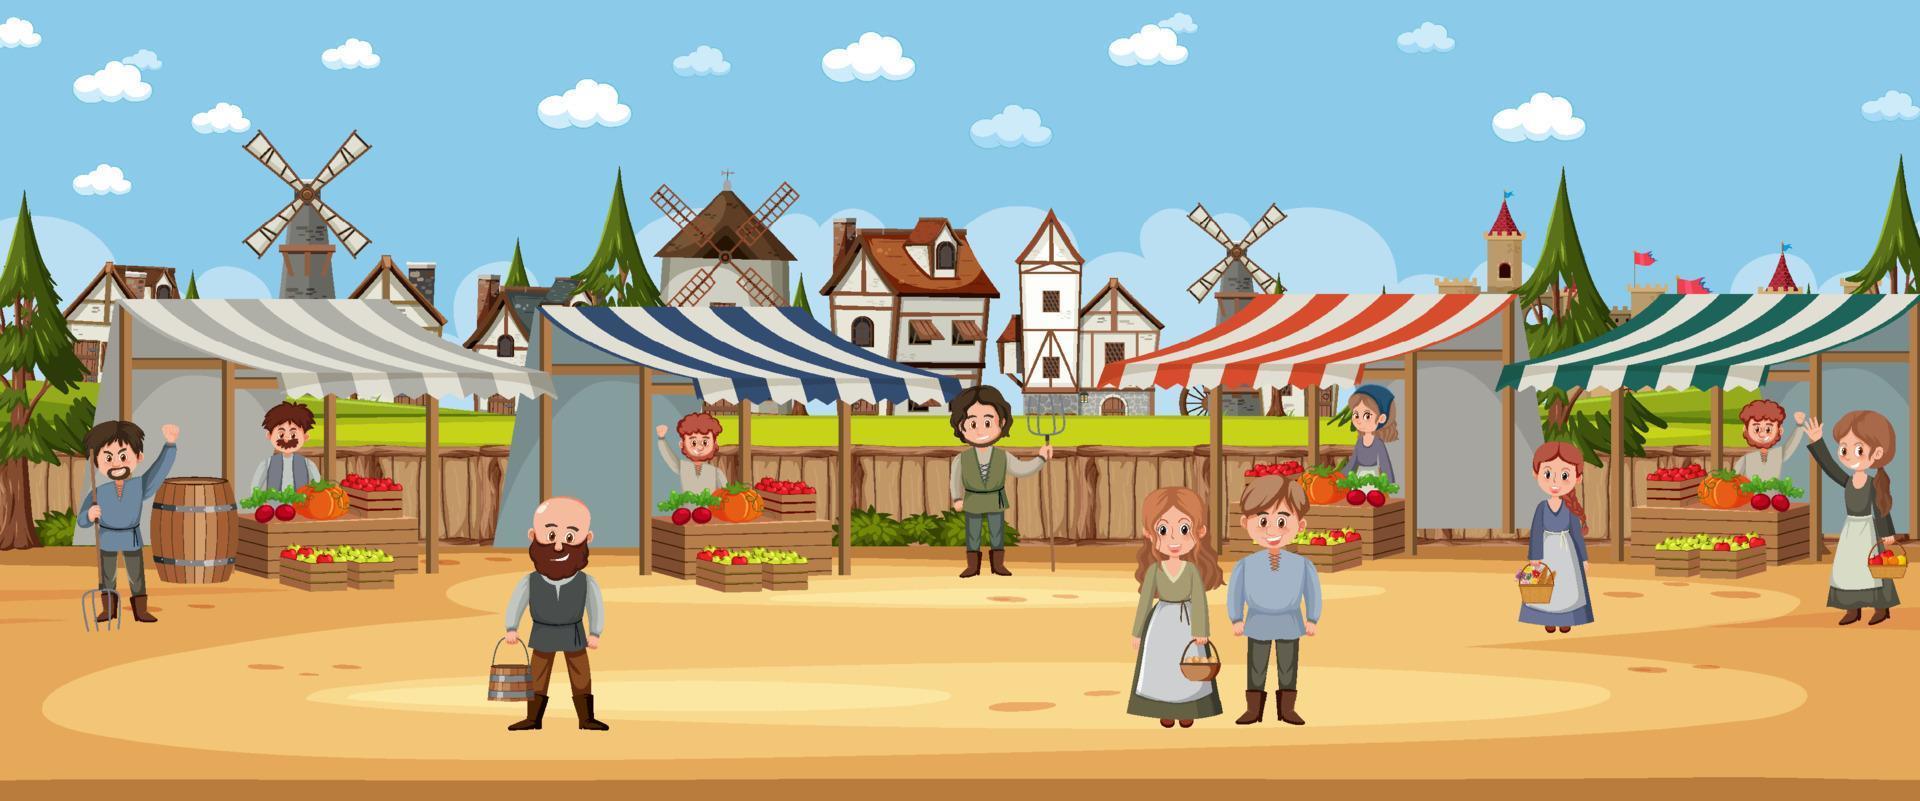 Medieval town scene with villagers at the market vector